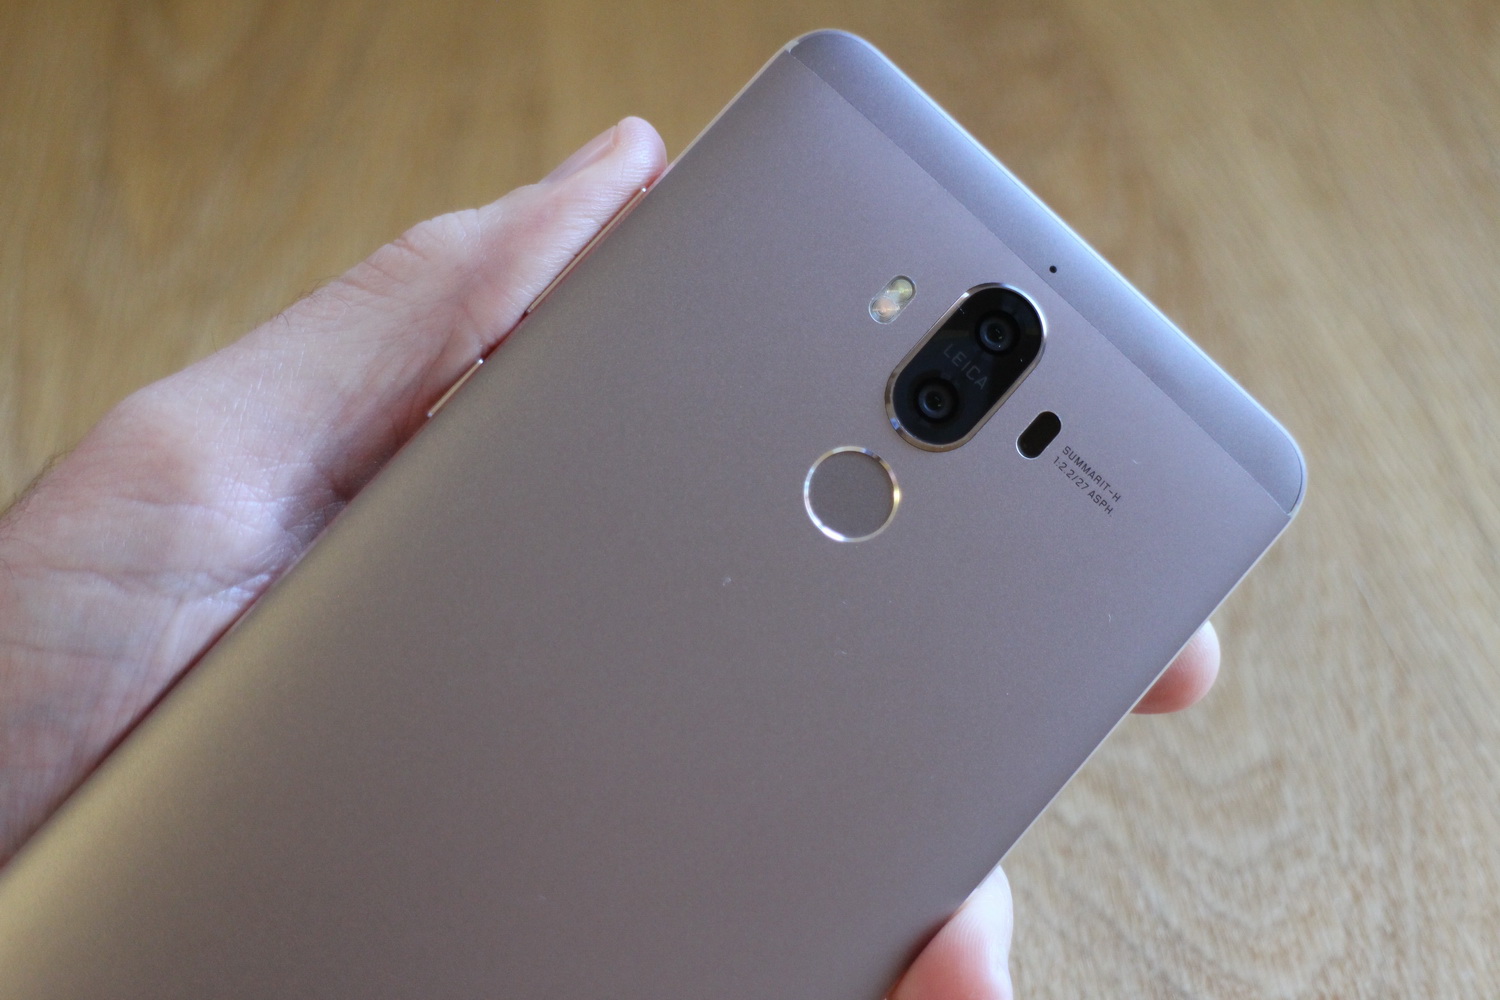 Huawei Mate 9 quick review: Digital Photography Review